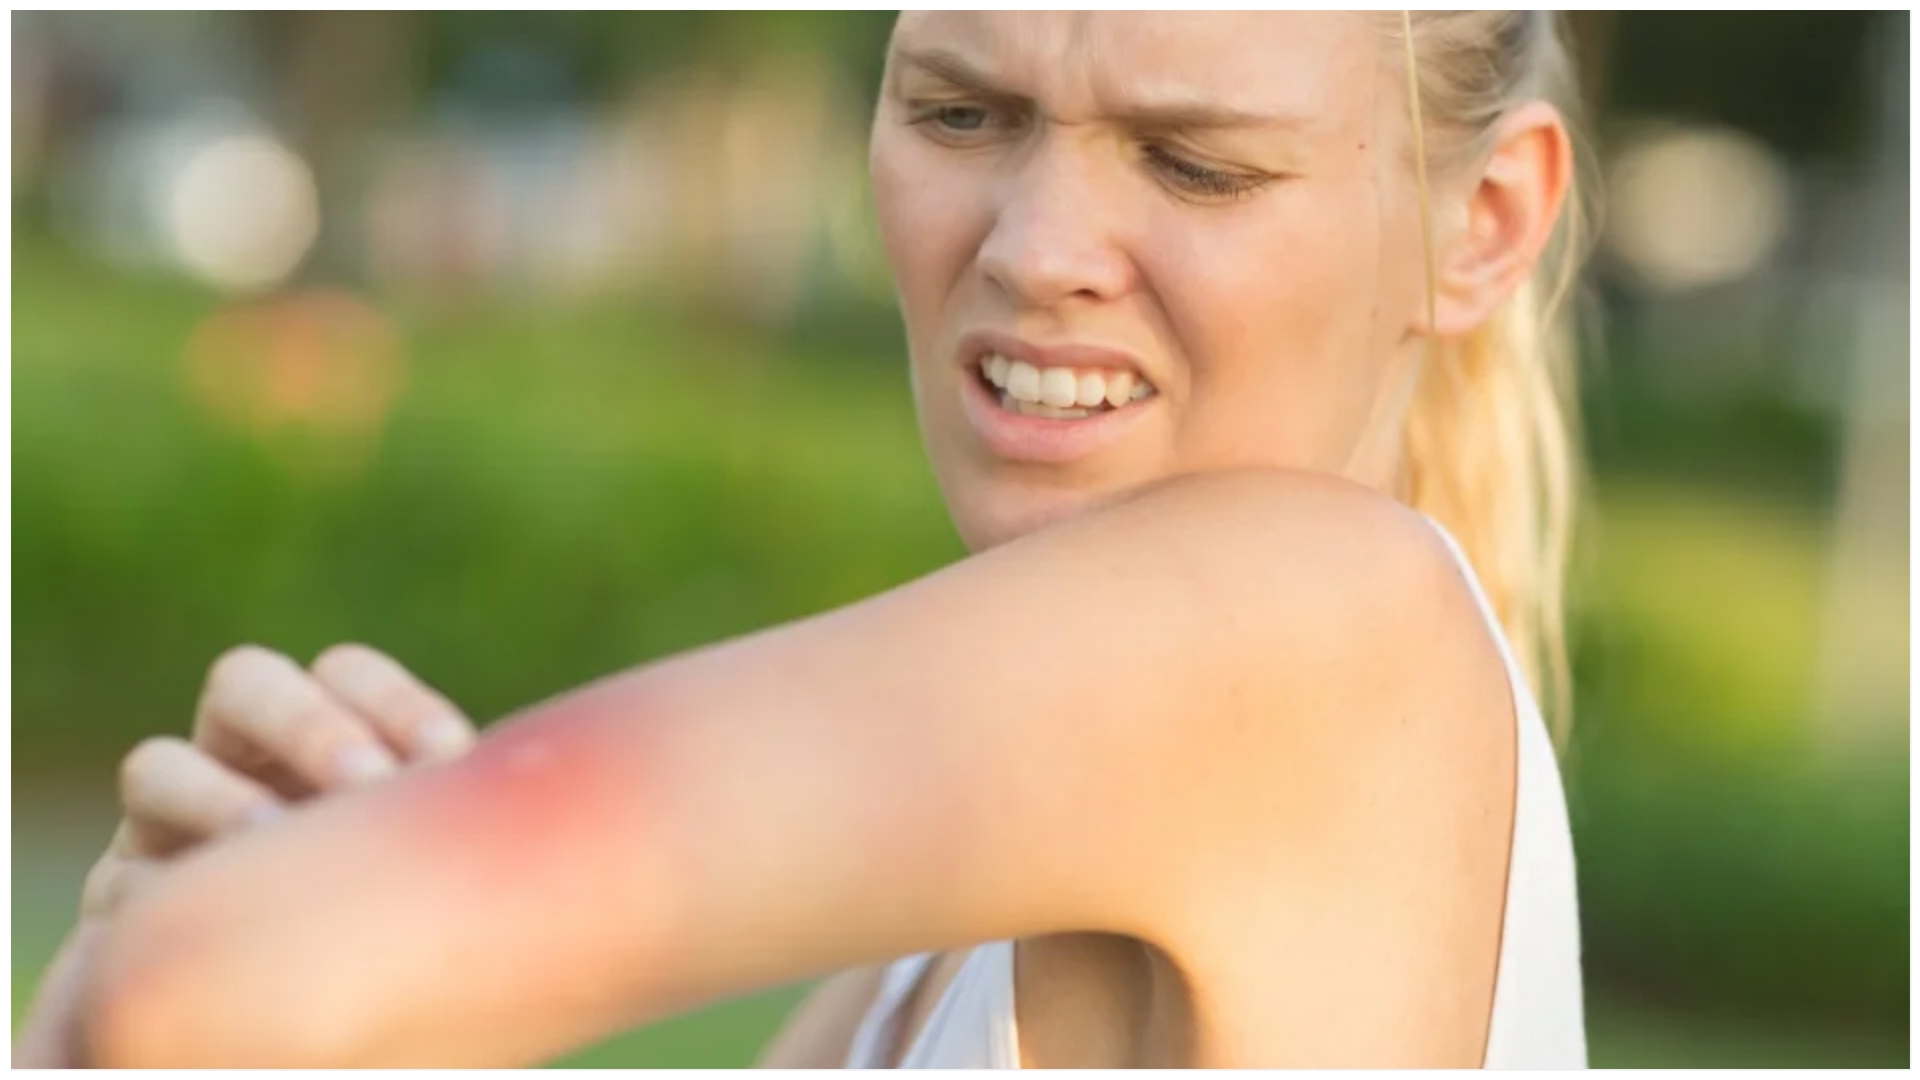 Urgent warning over insect bites and stings - symptoms & when to get emergency help